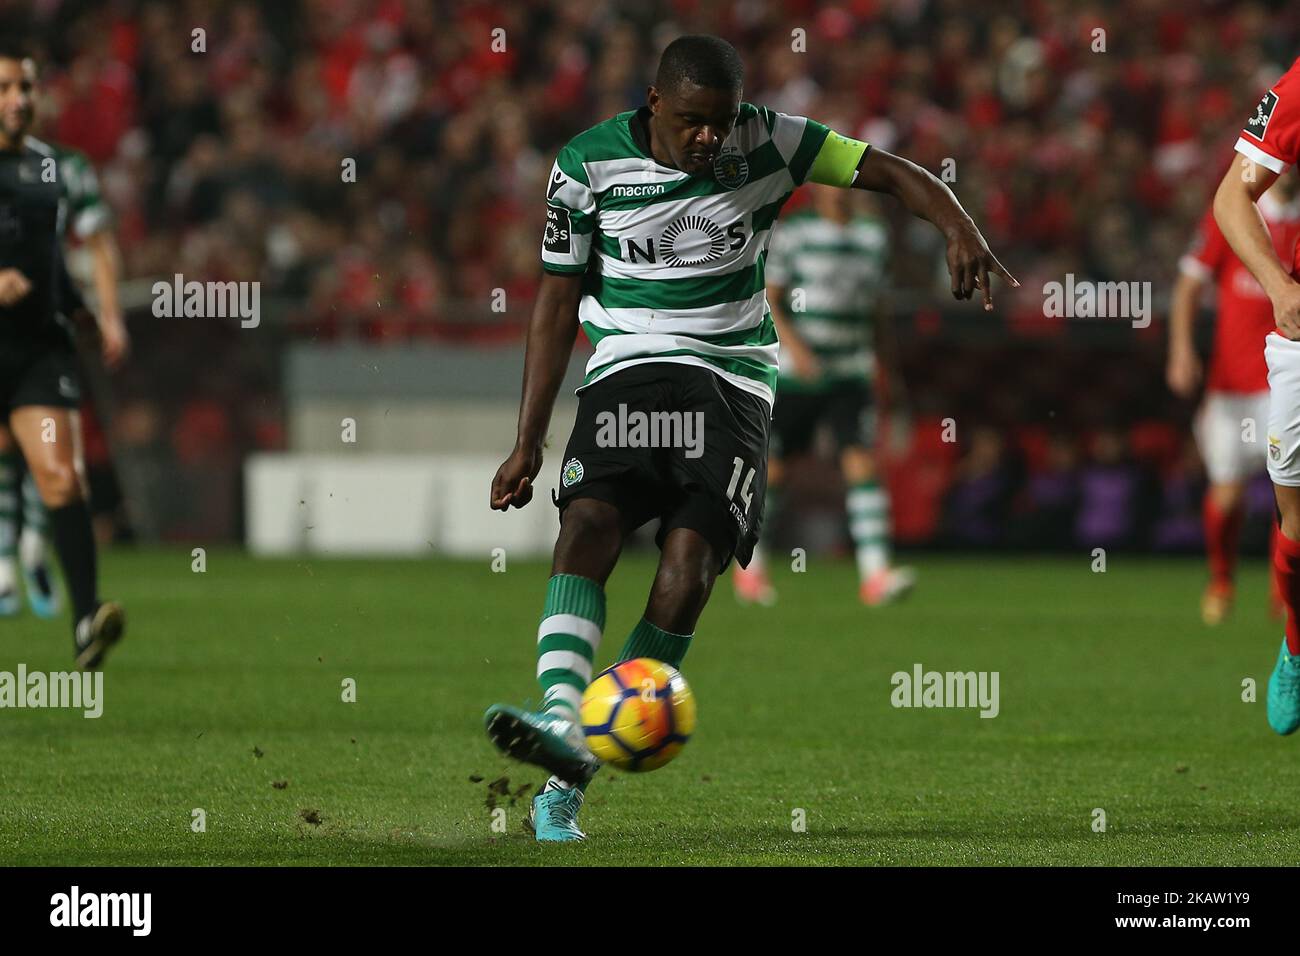 Sportings midfielder William Carvalho from Portugal during the Premier League 2017/18 match between SL Benfica v Sporting CP, at Luz Stadium in Lisbon on January 3, 2018. (Photo by Bruno Barros / DPI / NurPhoto) Stock Photo